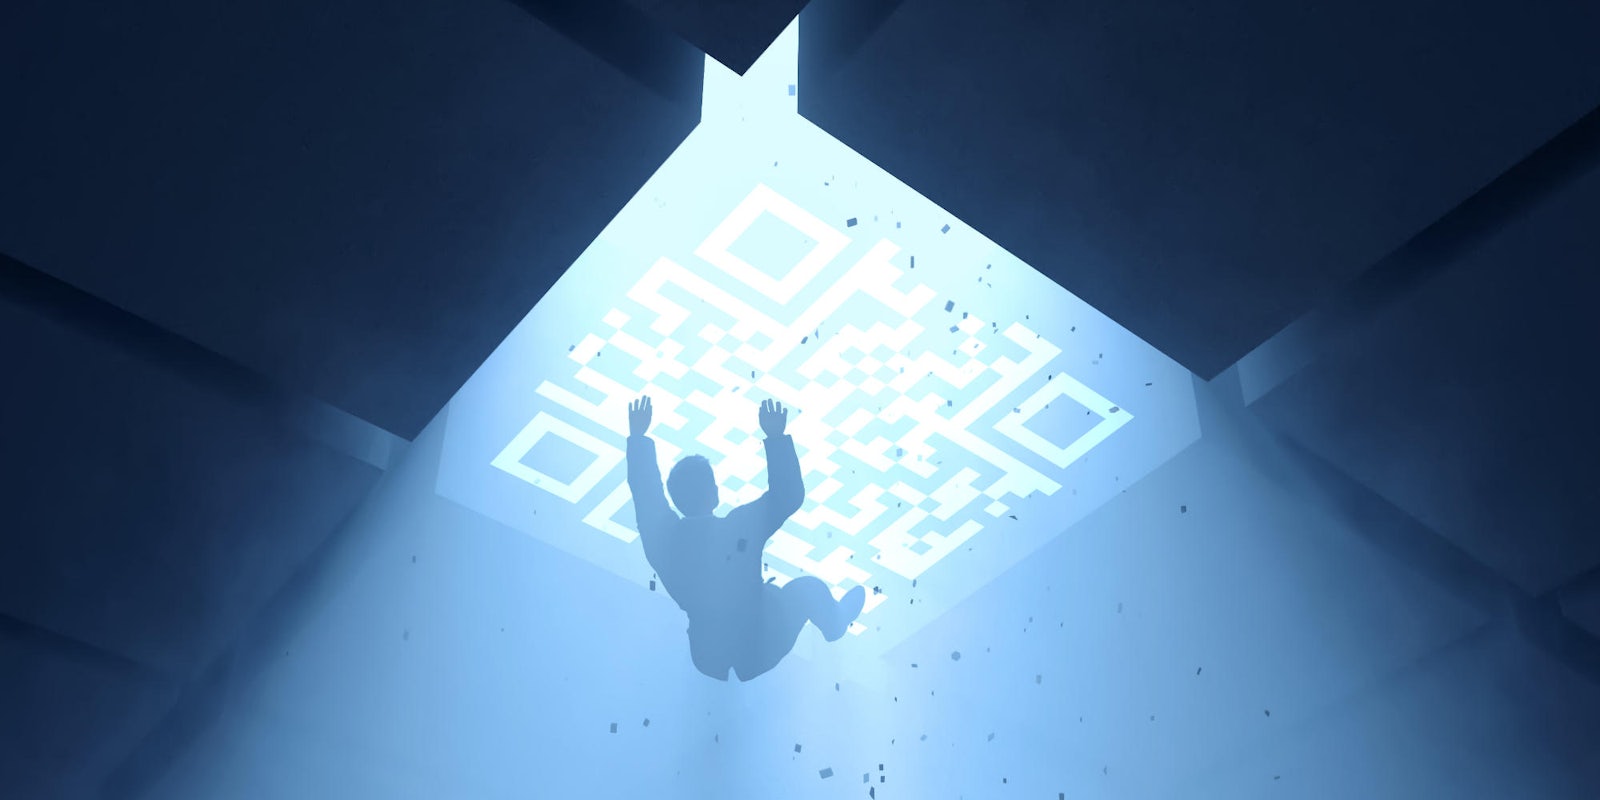 image of a man falling through a hole that looks like a QR code